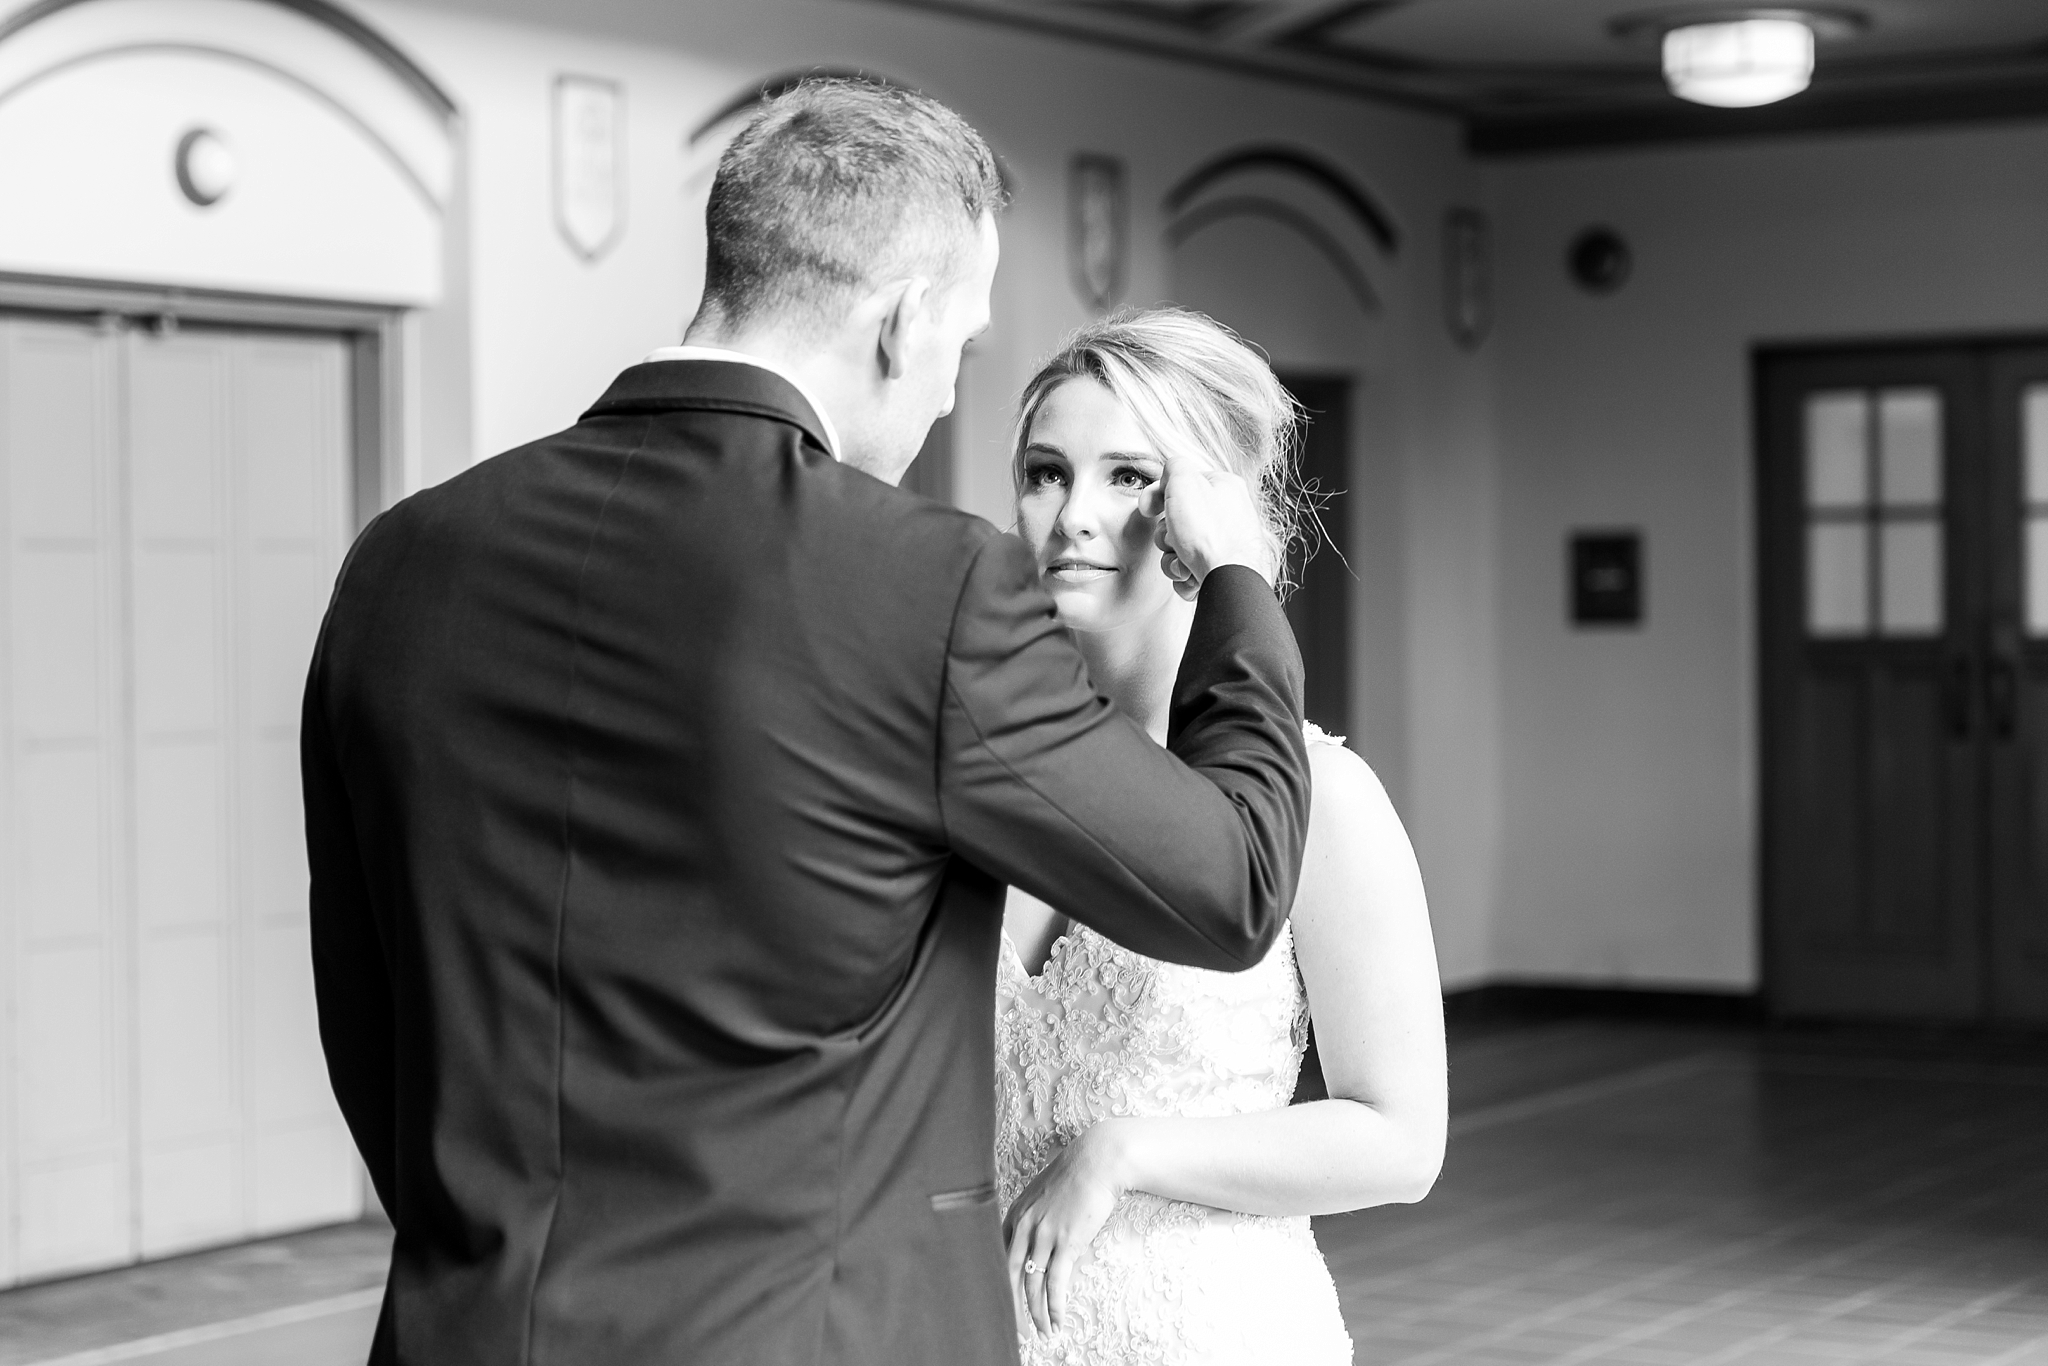 candid-romantic-wedding-photos-at-the-masonic-temple-belle-isle-detroit-institute-of-arts-in-detroit-michigan-by-courtney-carolyn-photography_0023.jpg